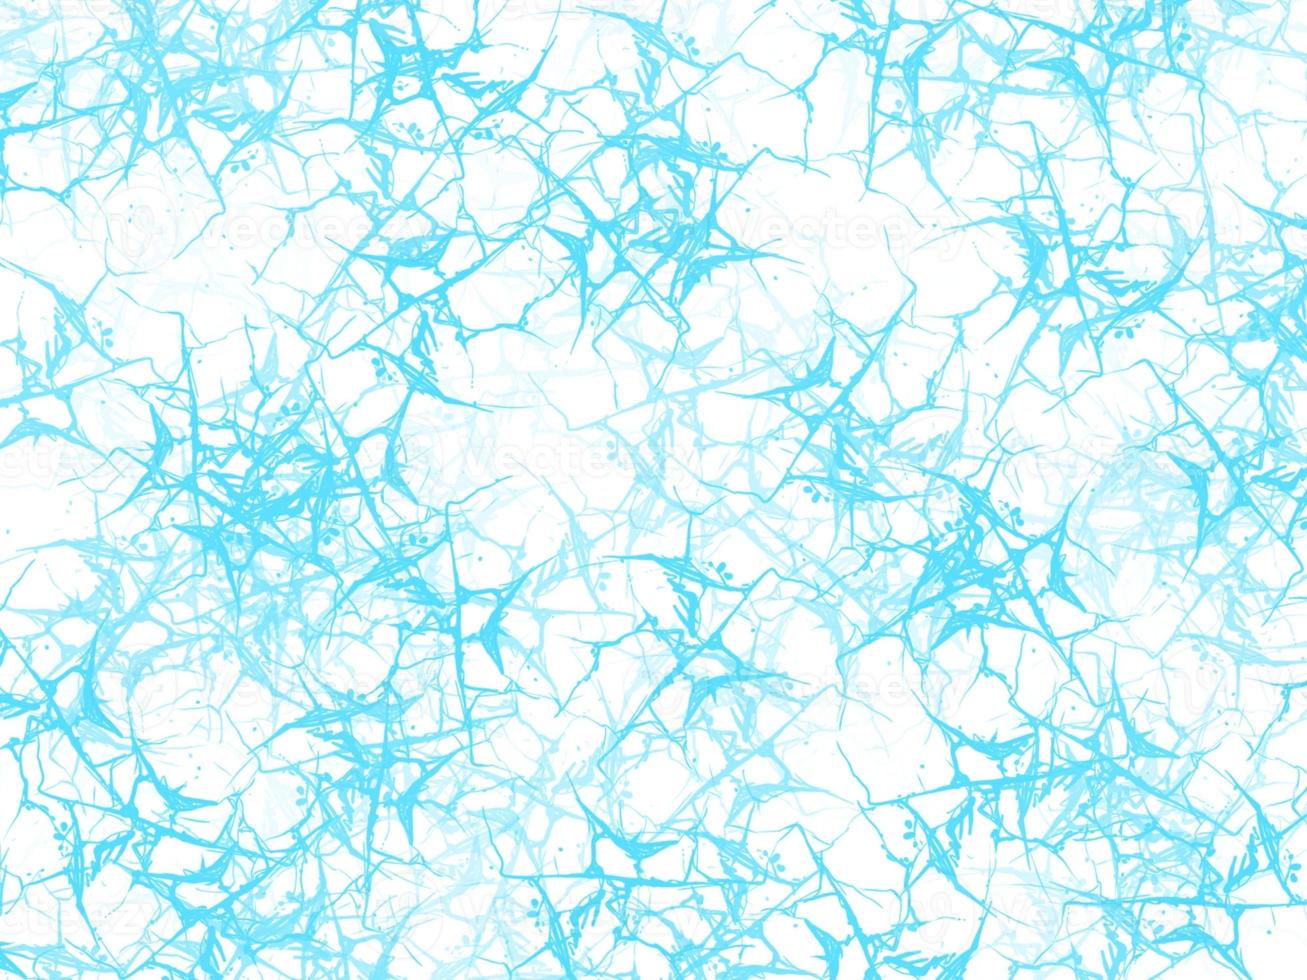 Illustration of a blue cobweb on a white background. Messy delicate patterns photo